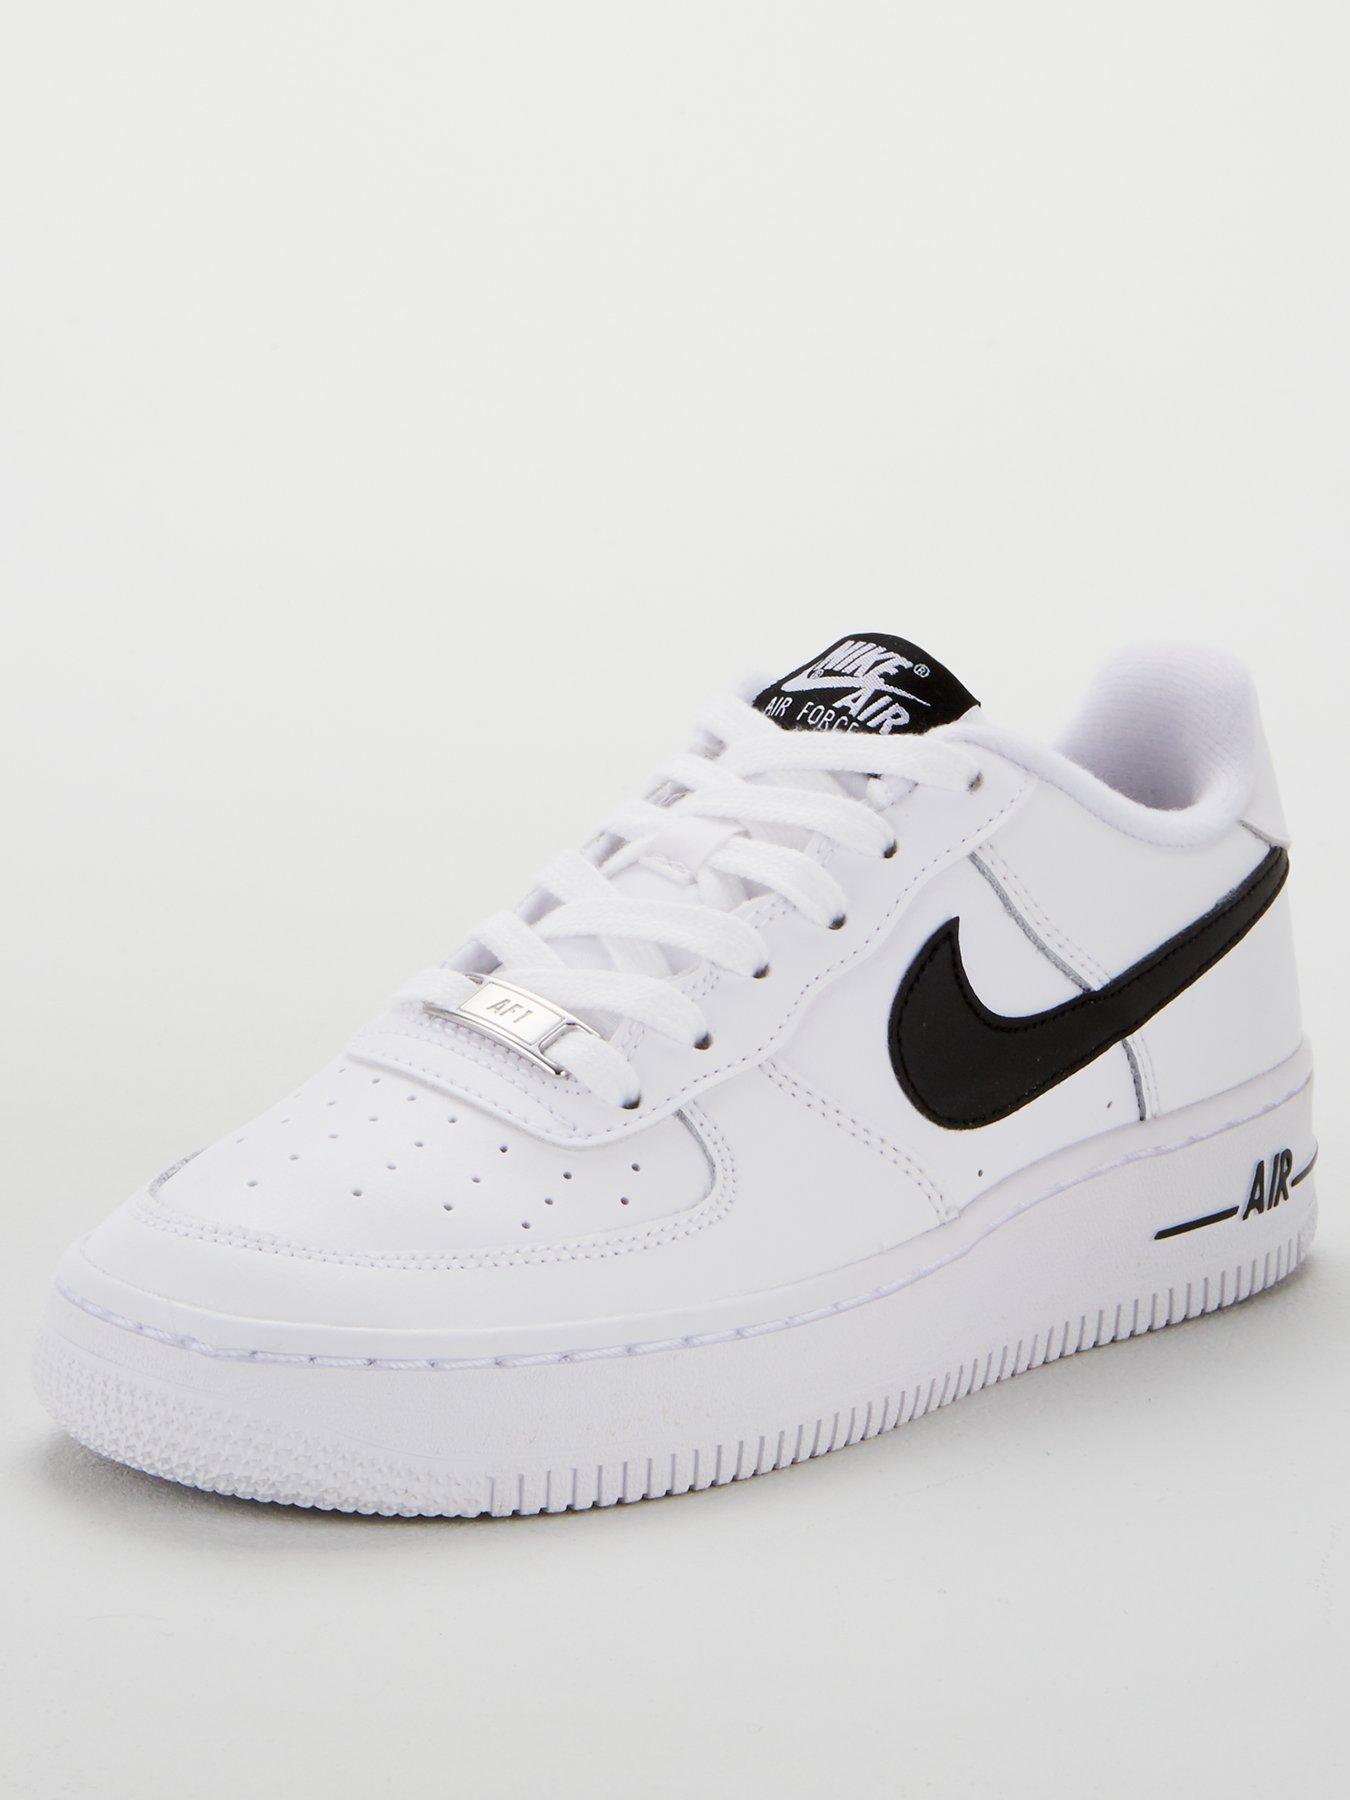 junior nike air force 1 size 4